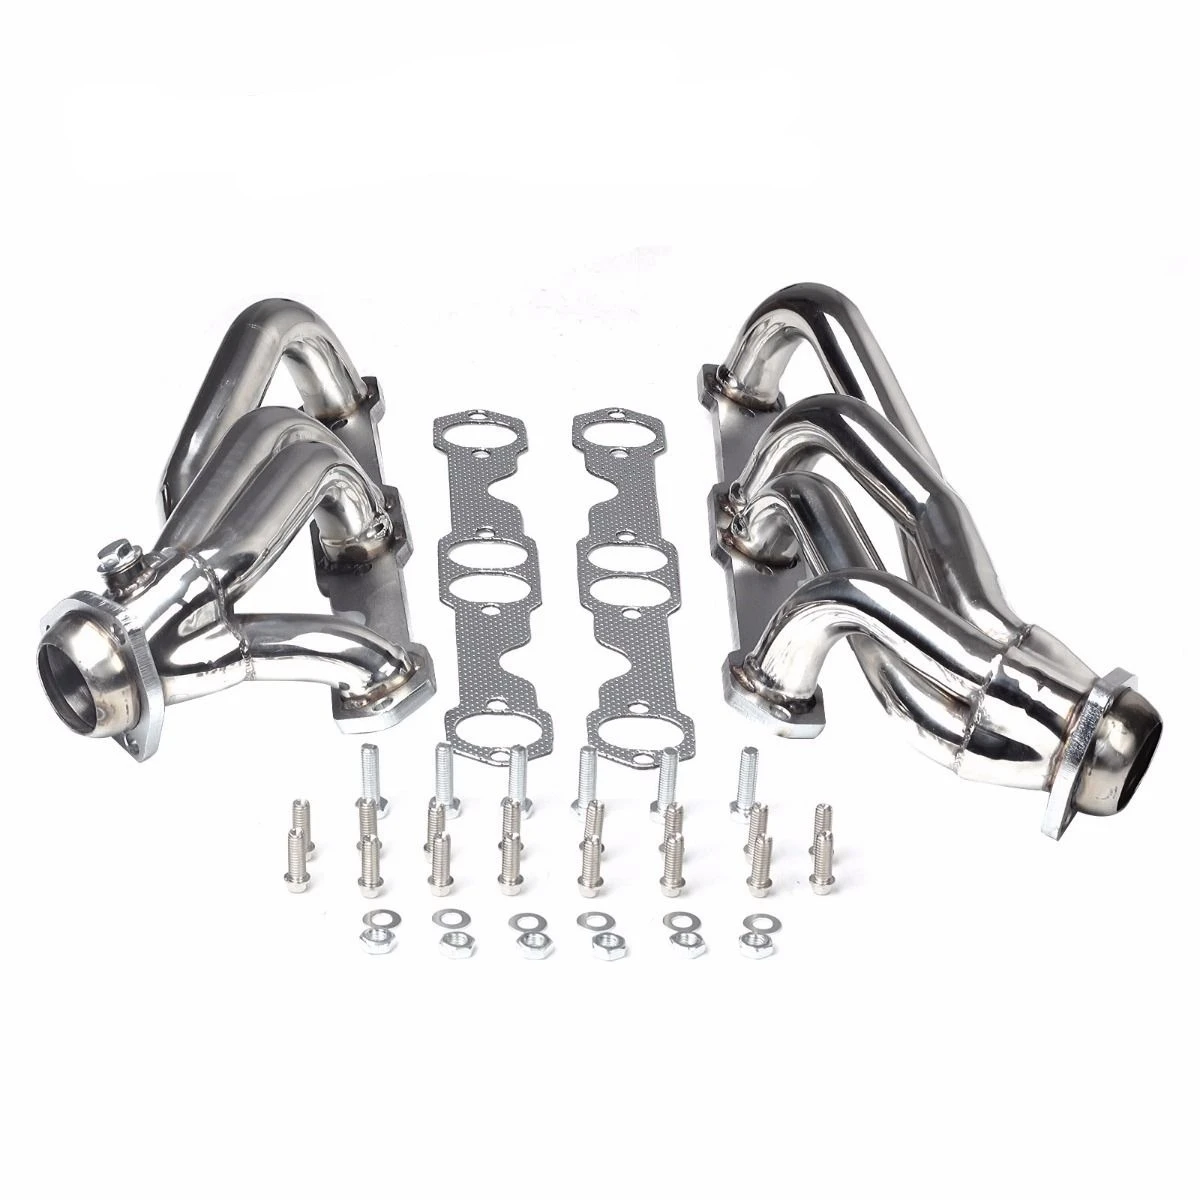 

Stainless Steel Truck Exhaust Headers Pipes For Chevy GMC 5.0L 5.7L 305 350 V8 1988-1997